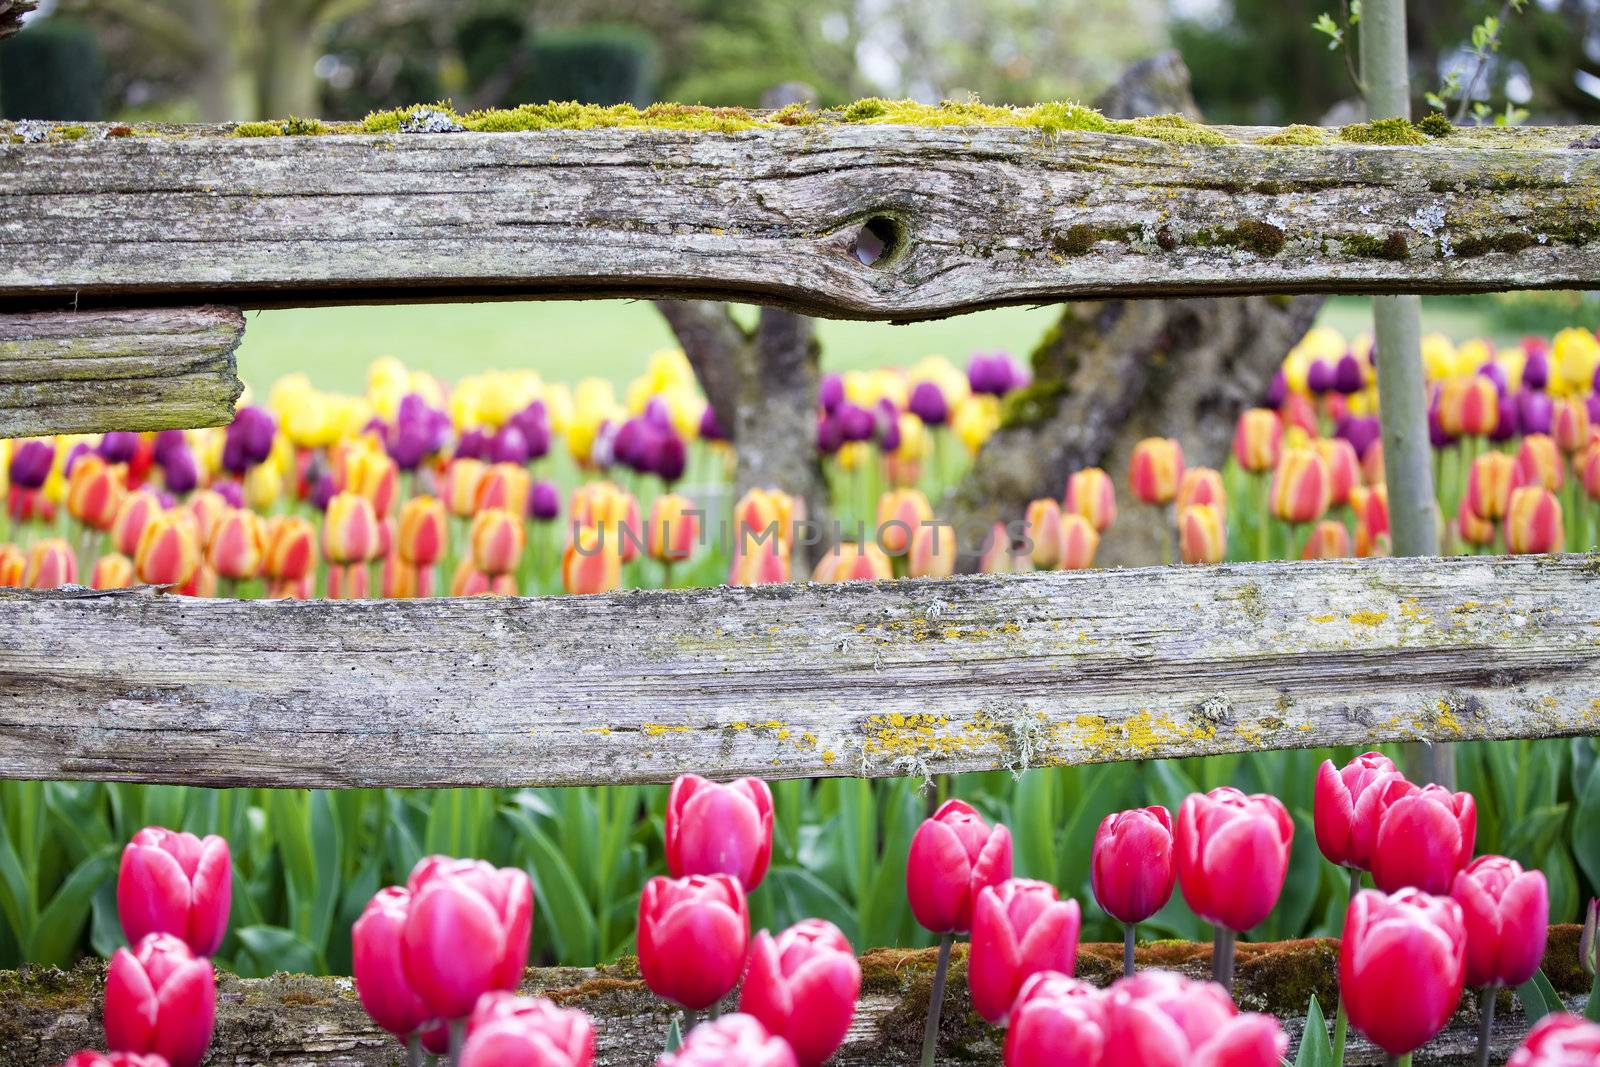 Tulips and rustic wooden horizontal fence beam, focus on wood fencing. “Courtesy of RoozenGaarde (Tulips.com).”